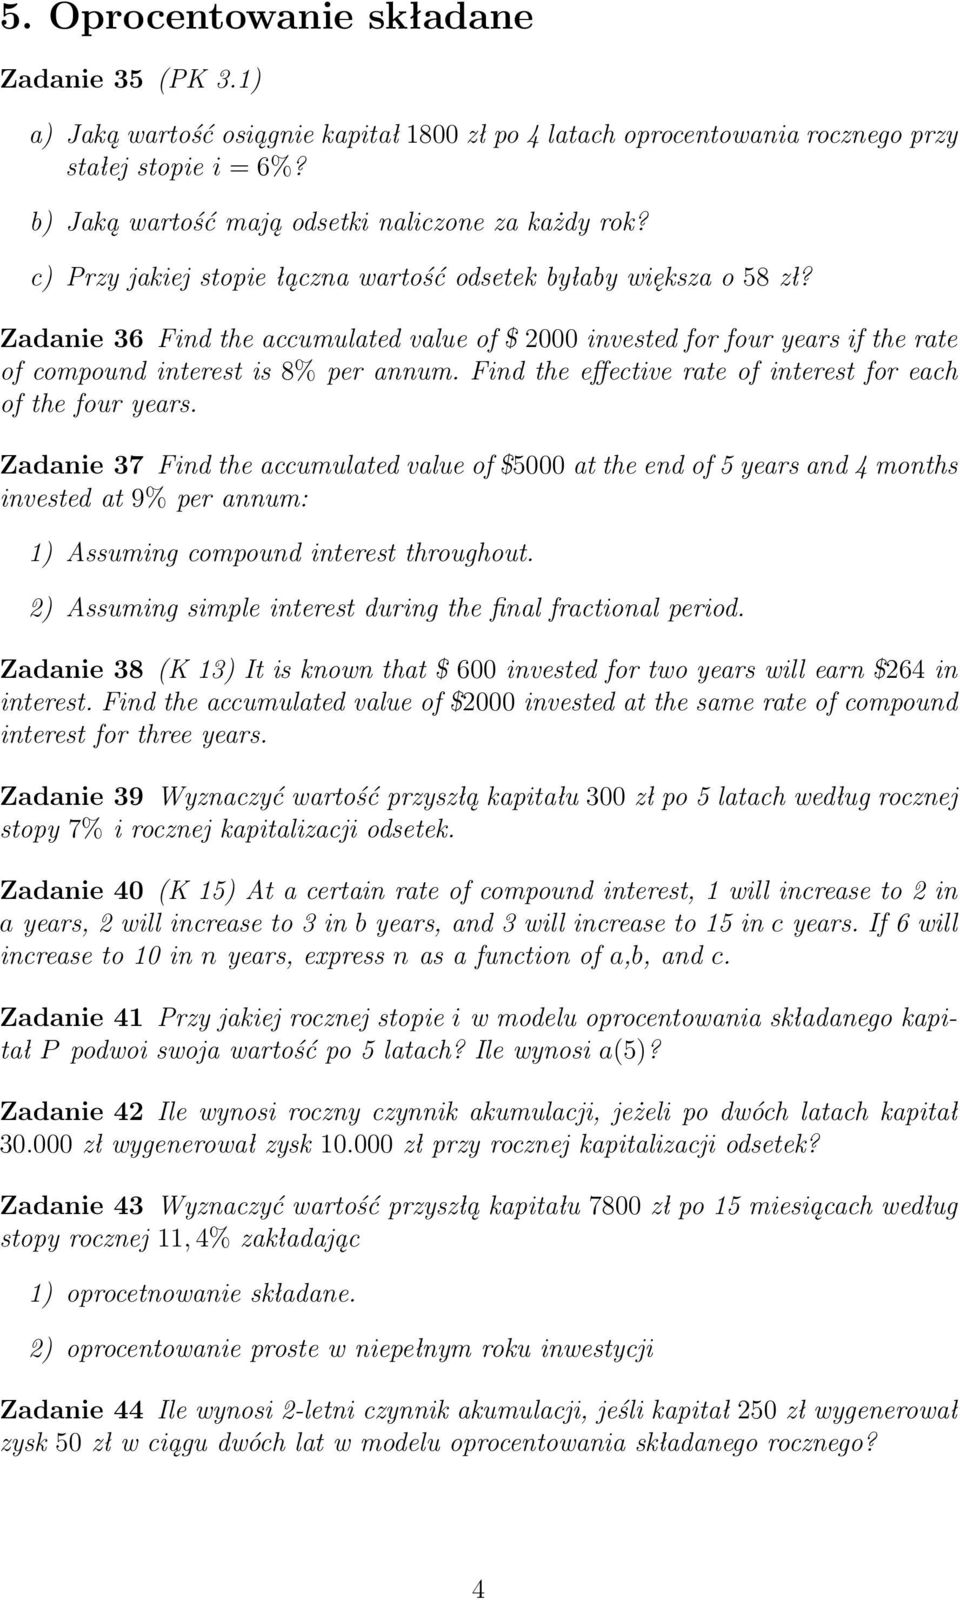 Zadanie 36 Find the accumulated value of $ 2000 invested for four years if the rate of compound interest is 8% per annum. Find the effective rate of interest for each of the four years.